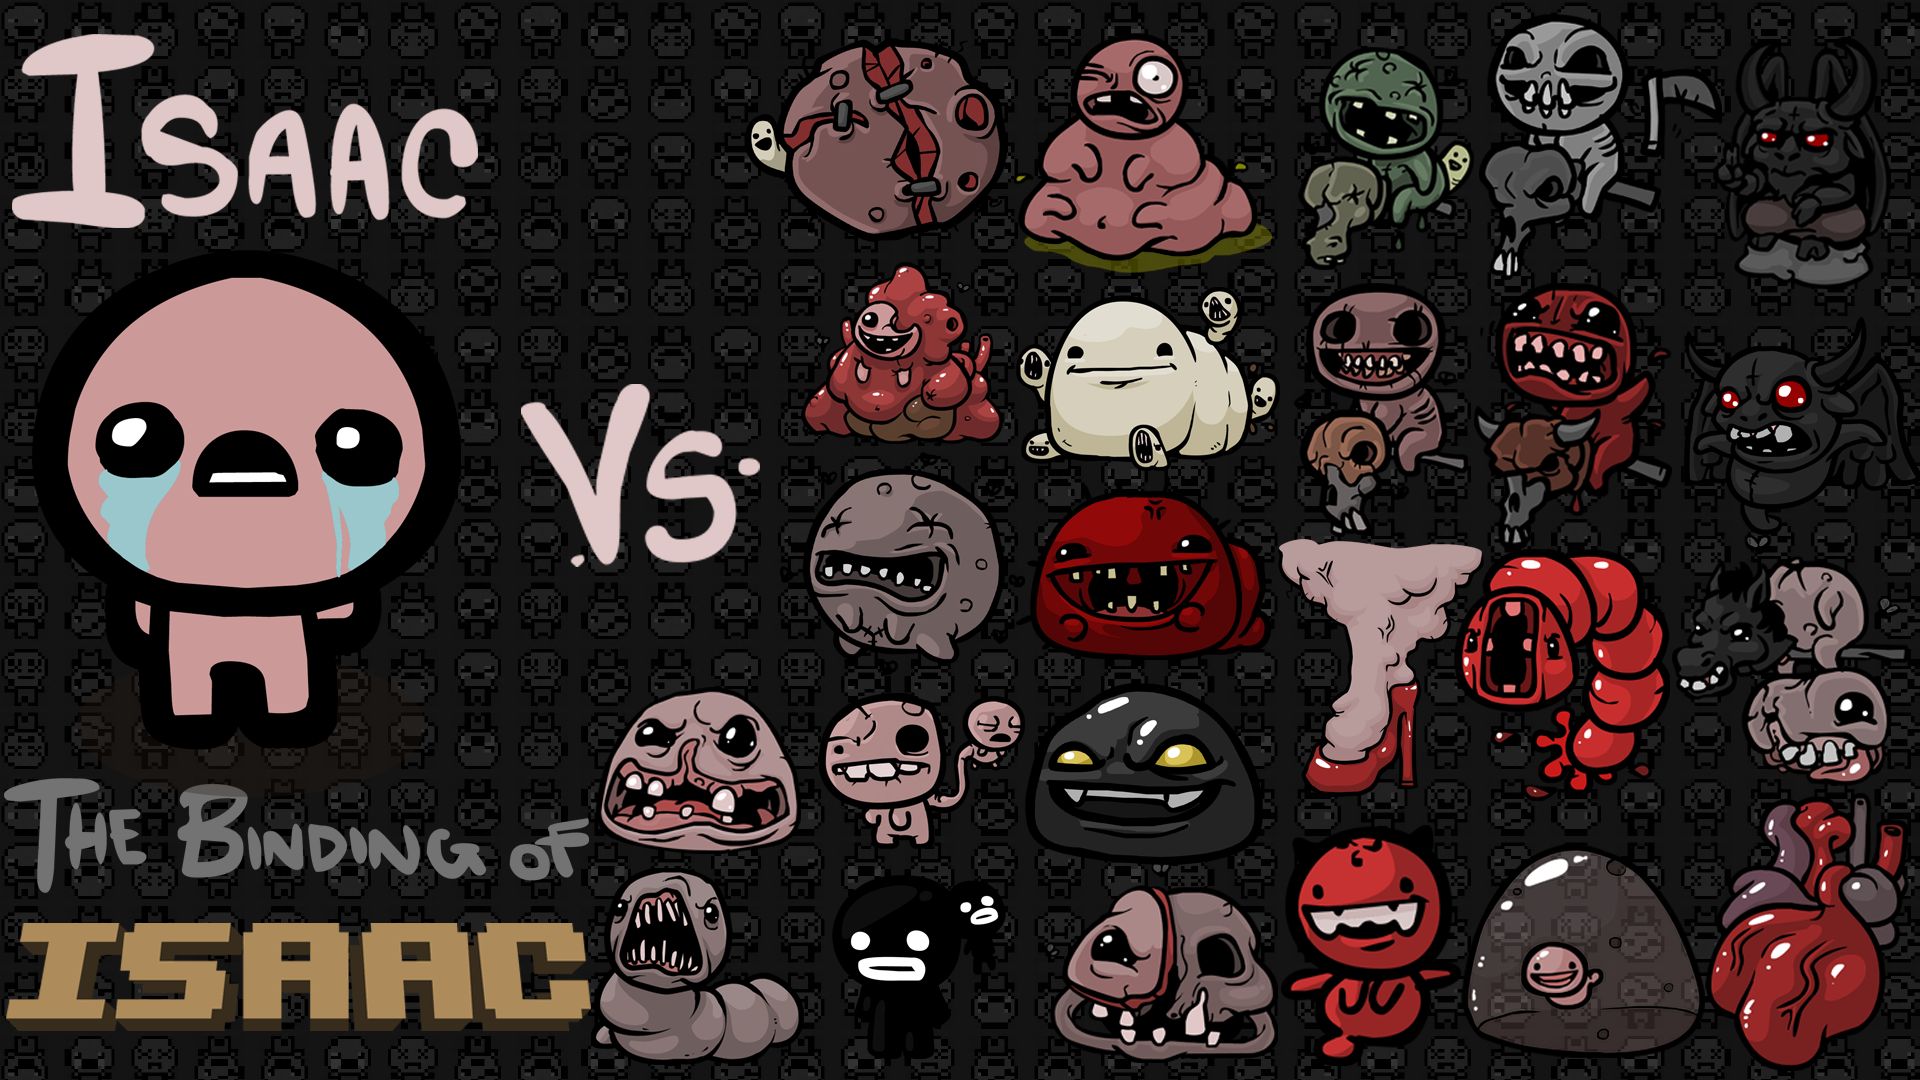 Images For  Binding Of Isaac Wallpaper  The binding of isaac Isaac Game  pictures